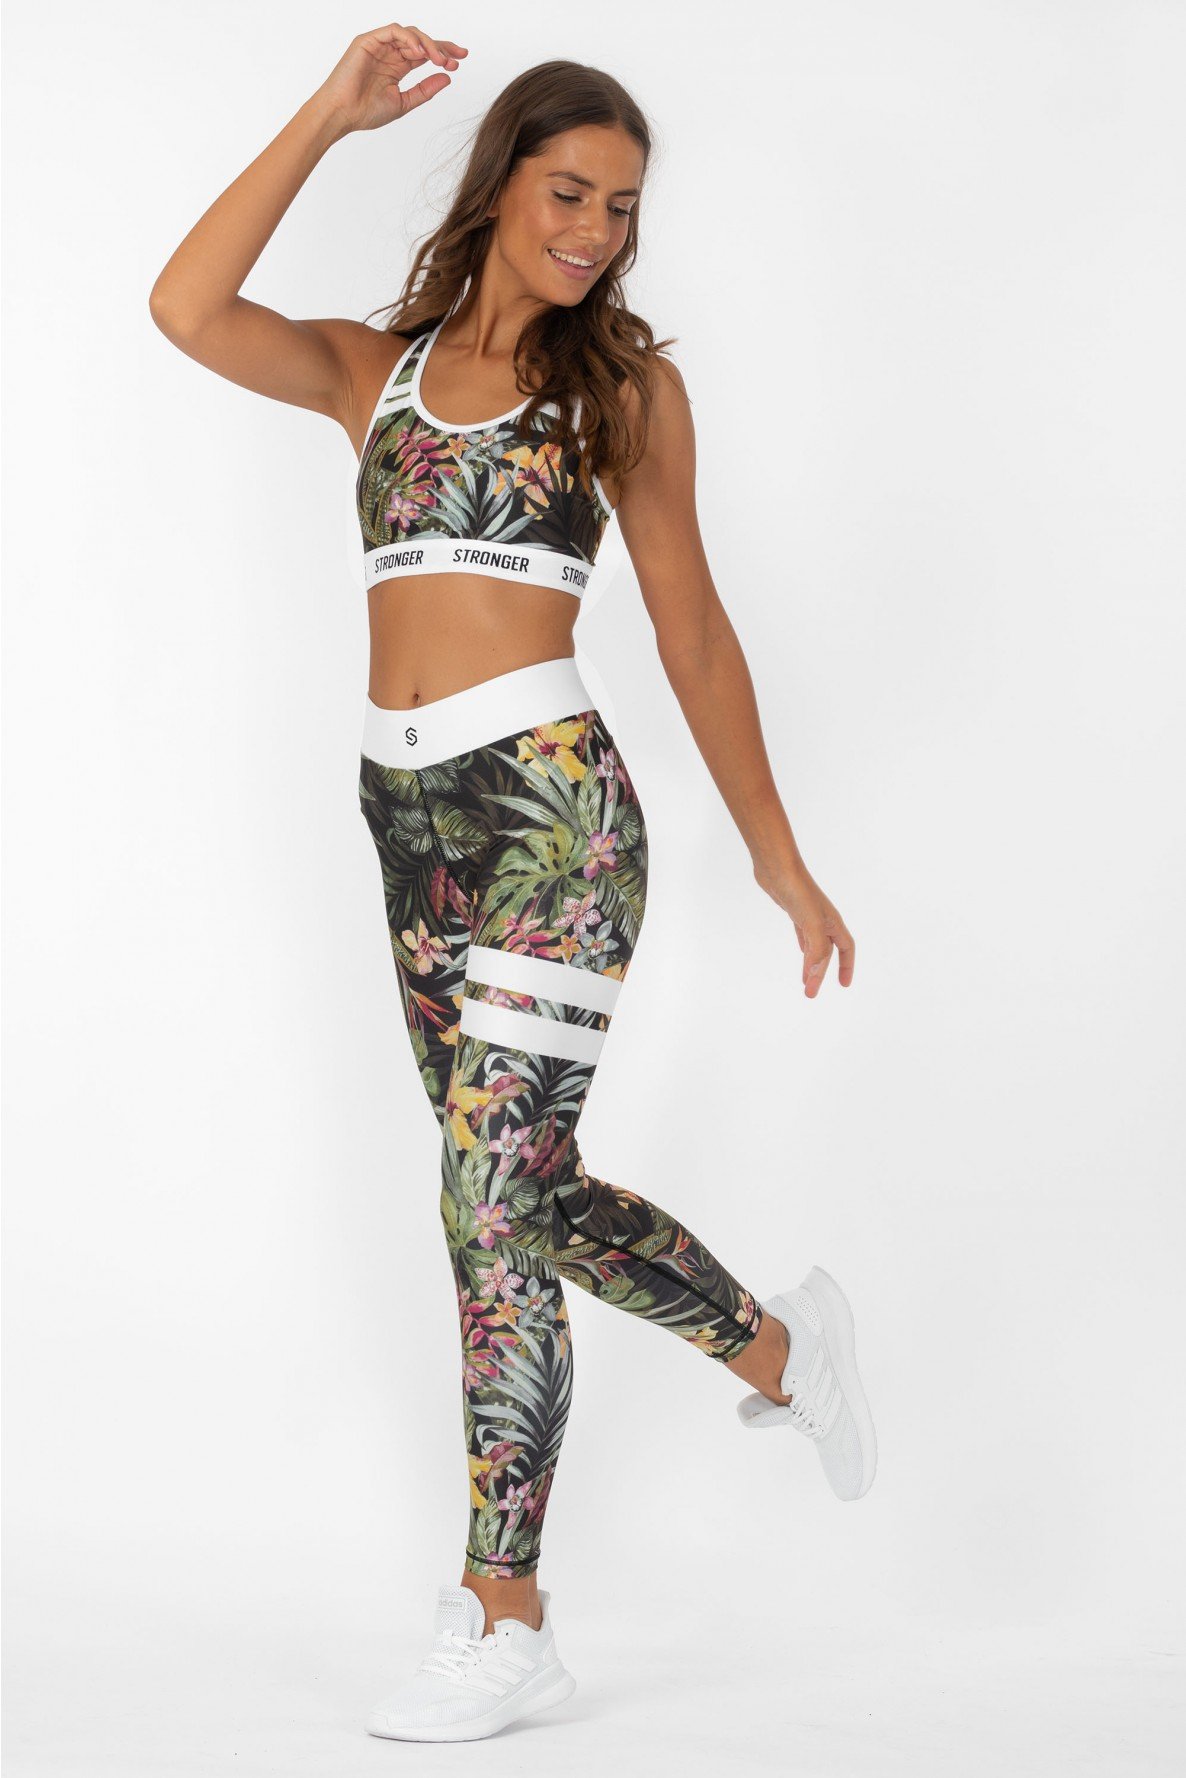 stronger workout floral outfit